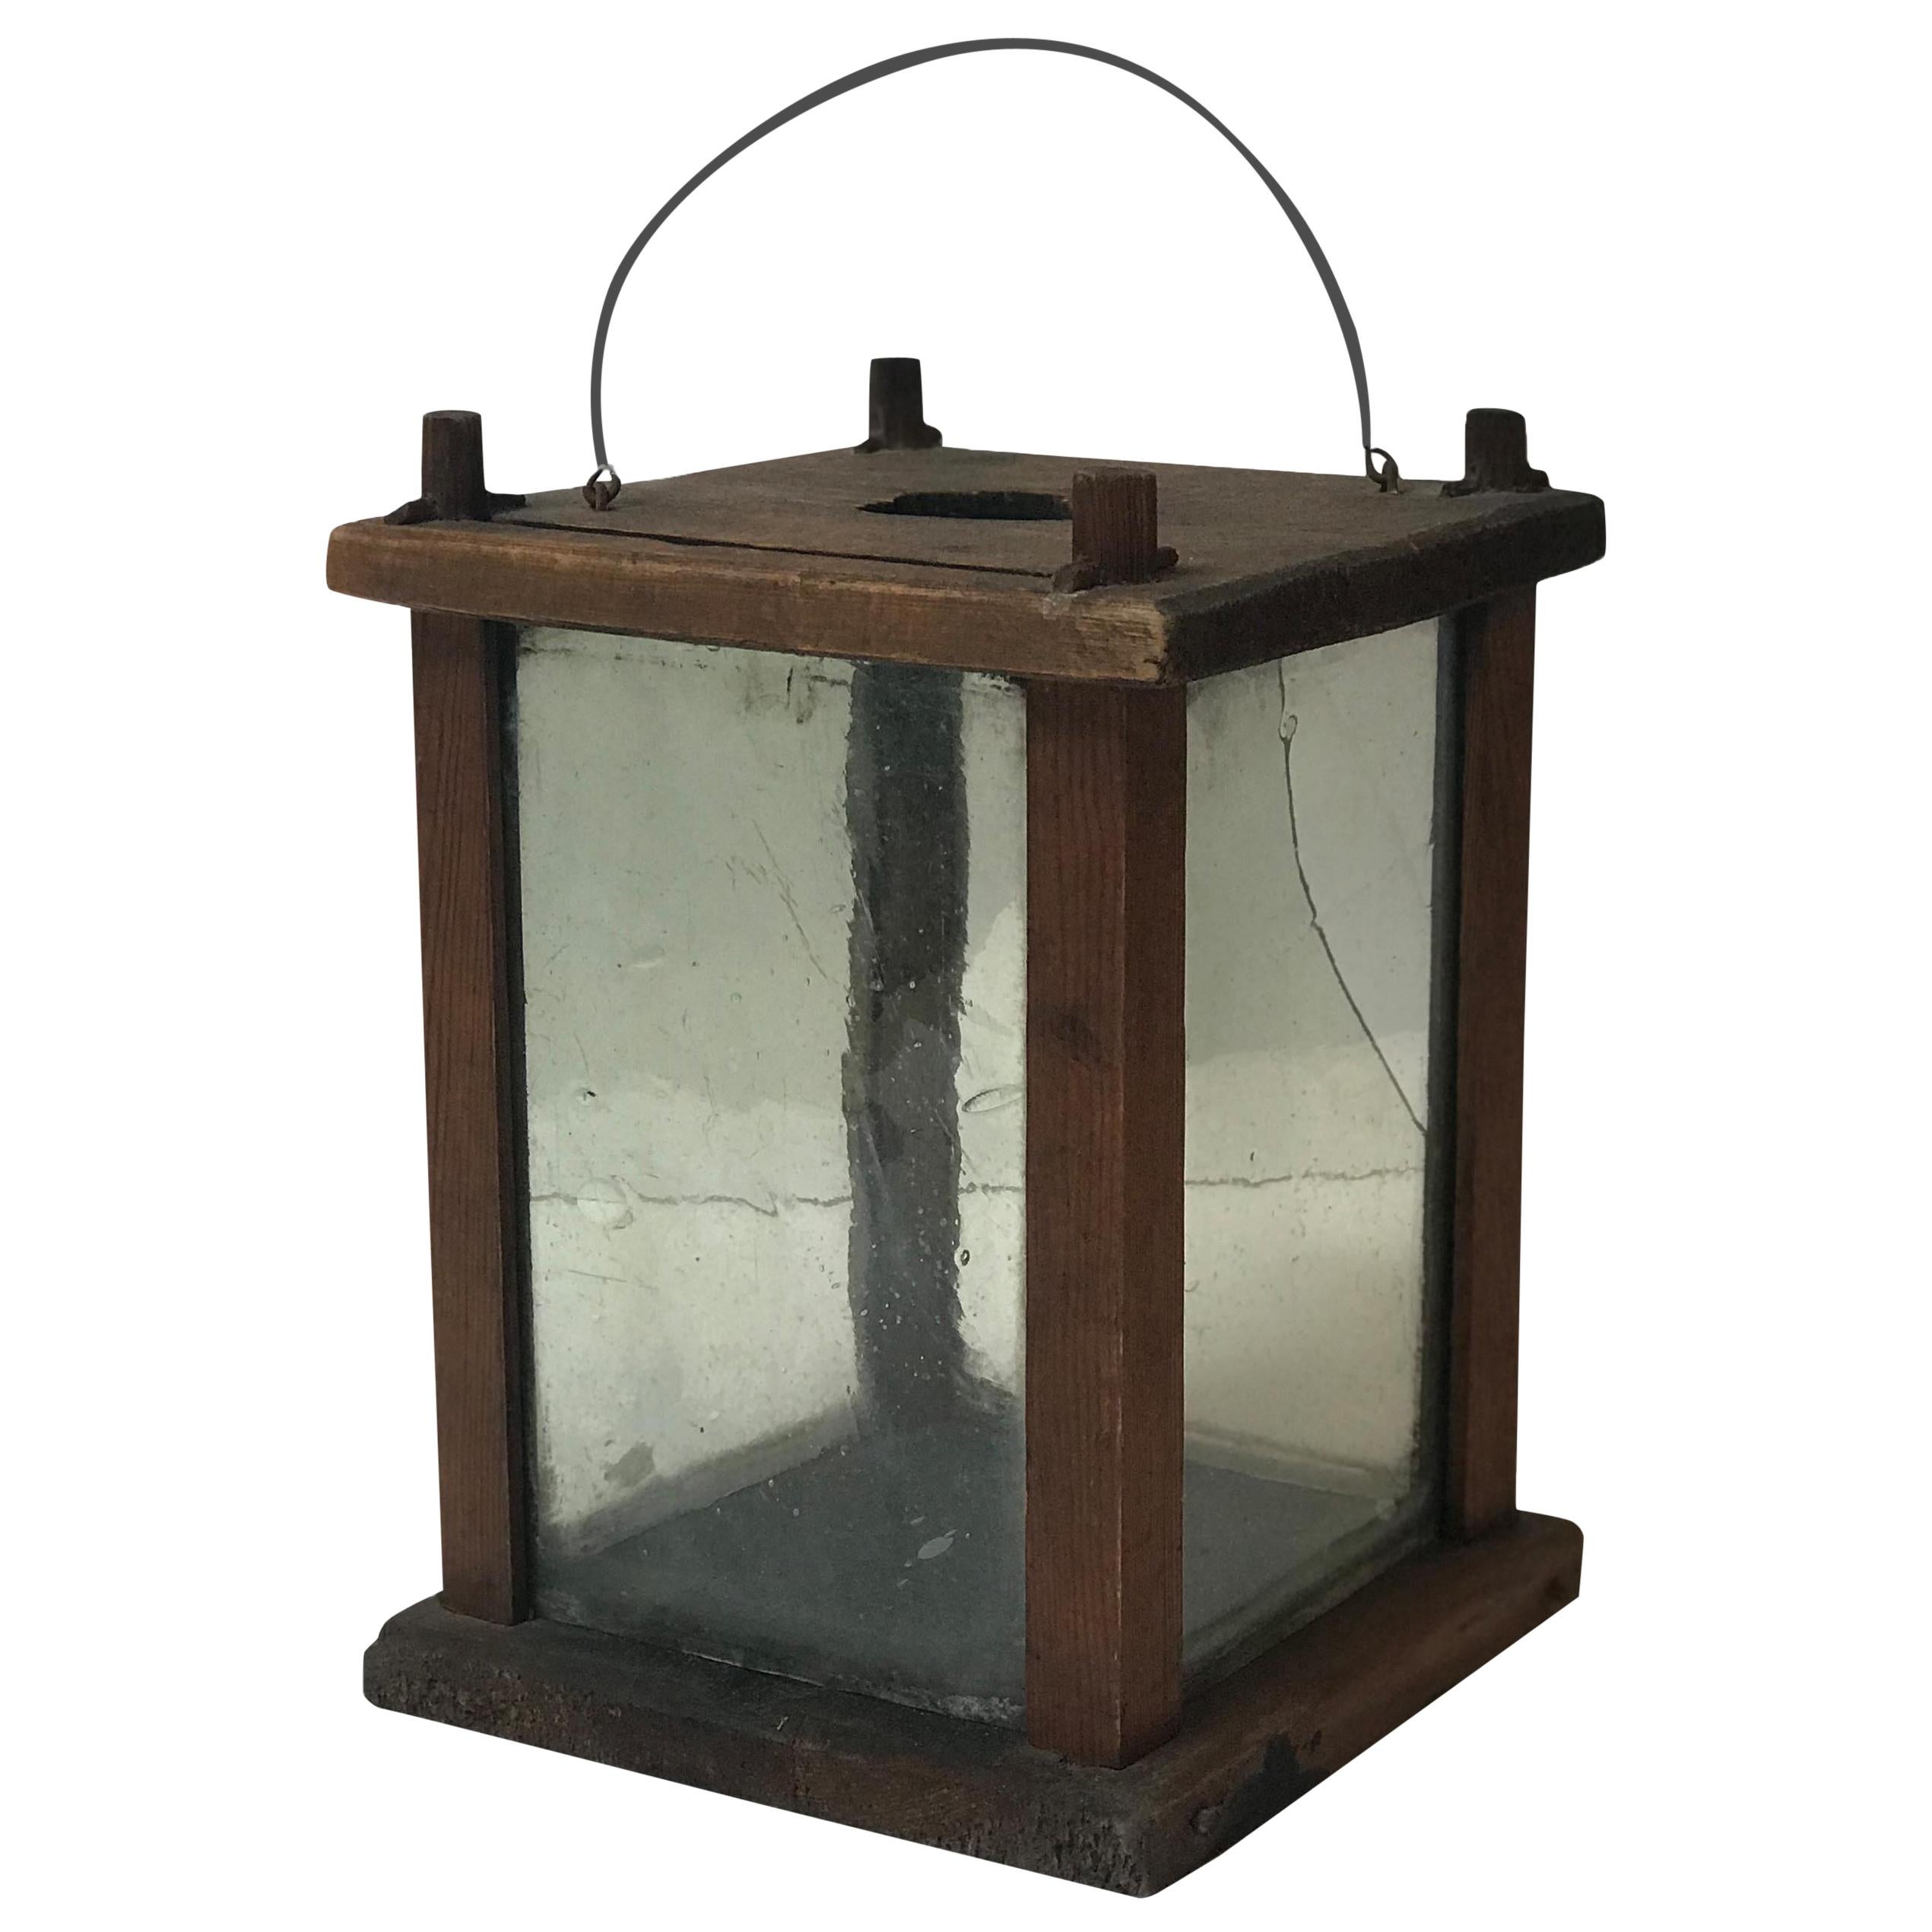 Late 19th Century Square Wooden Lantern from Sweden